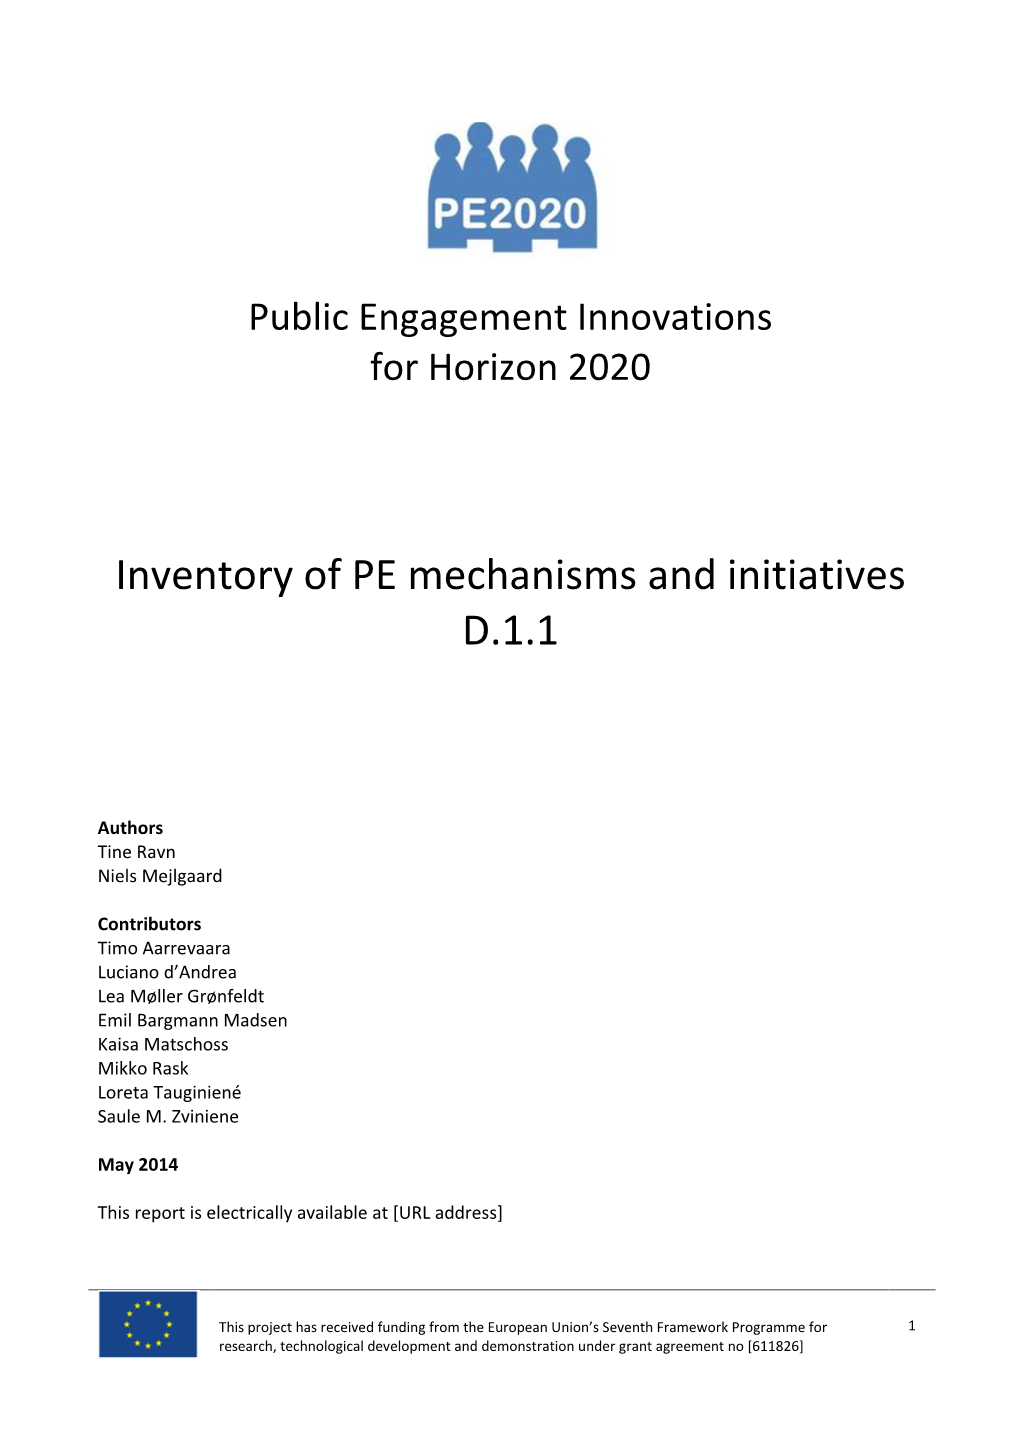 Inventory of PE Mechanisms and Initiatives D.1.1